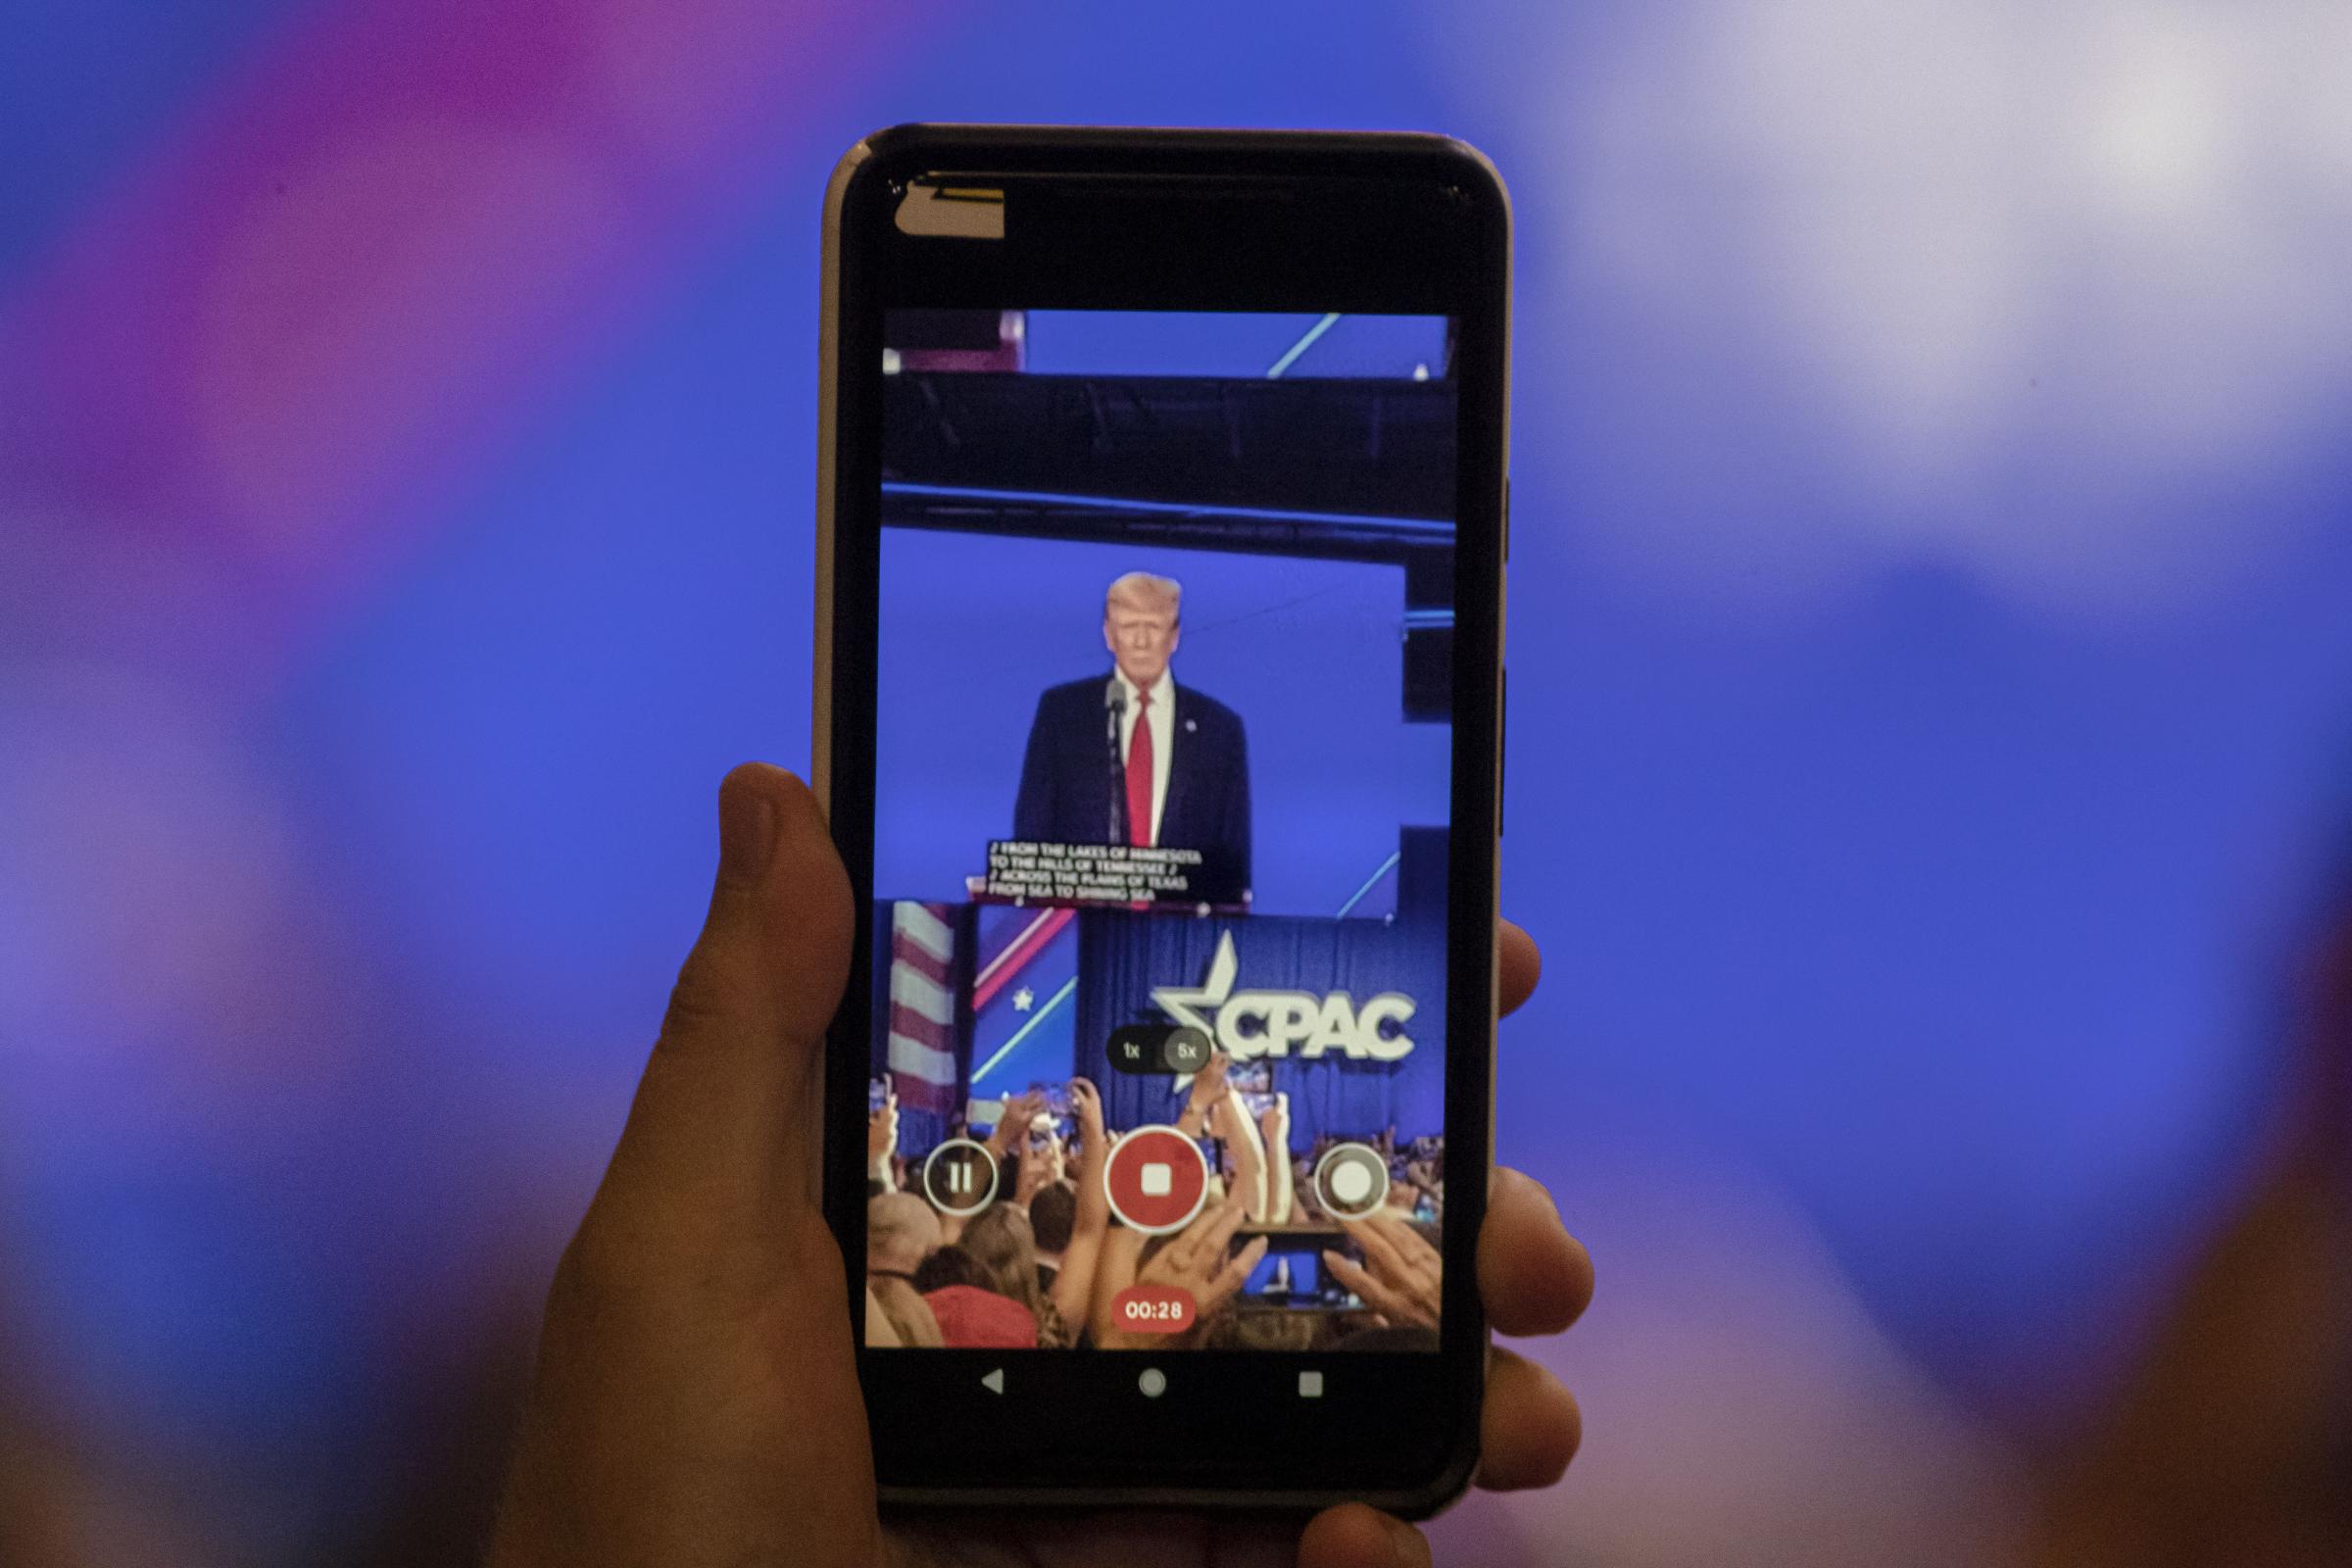 CPAC Texas - Cellphones rise as Donald Trump makes his way to the...